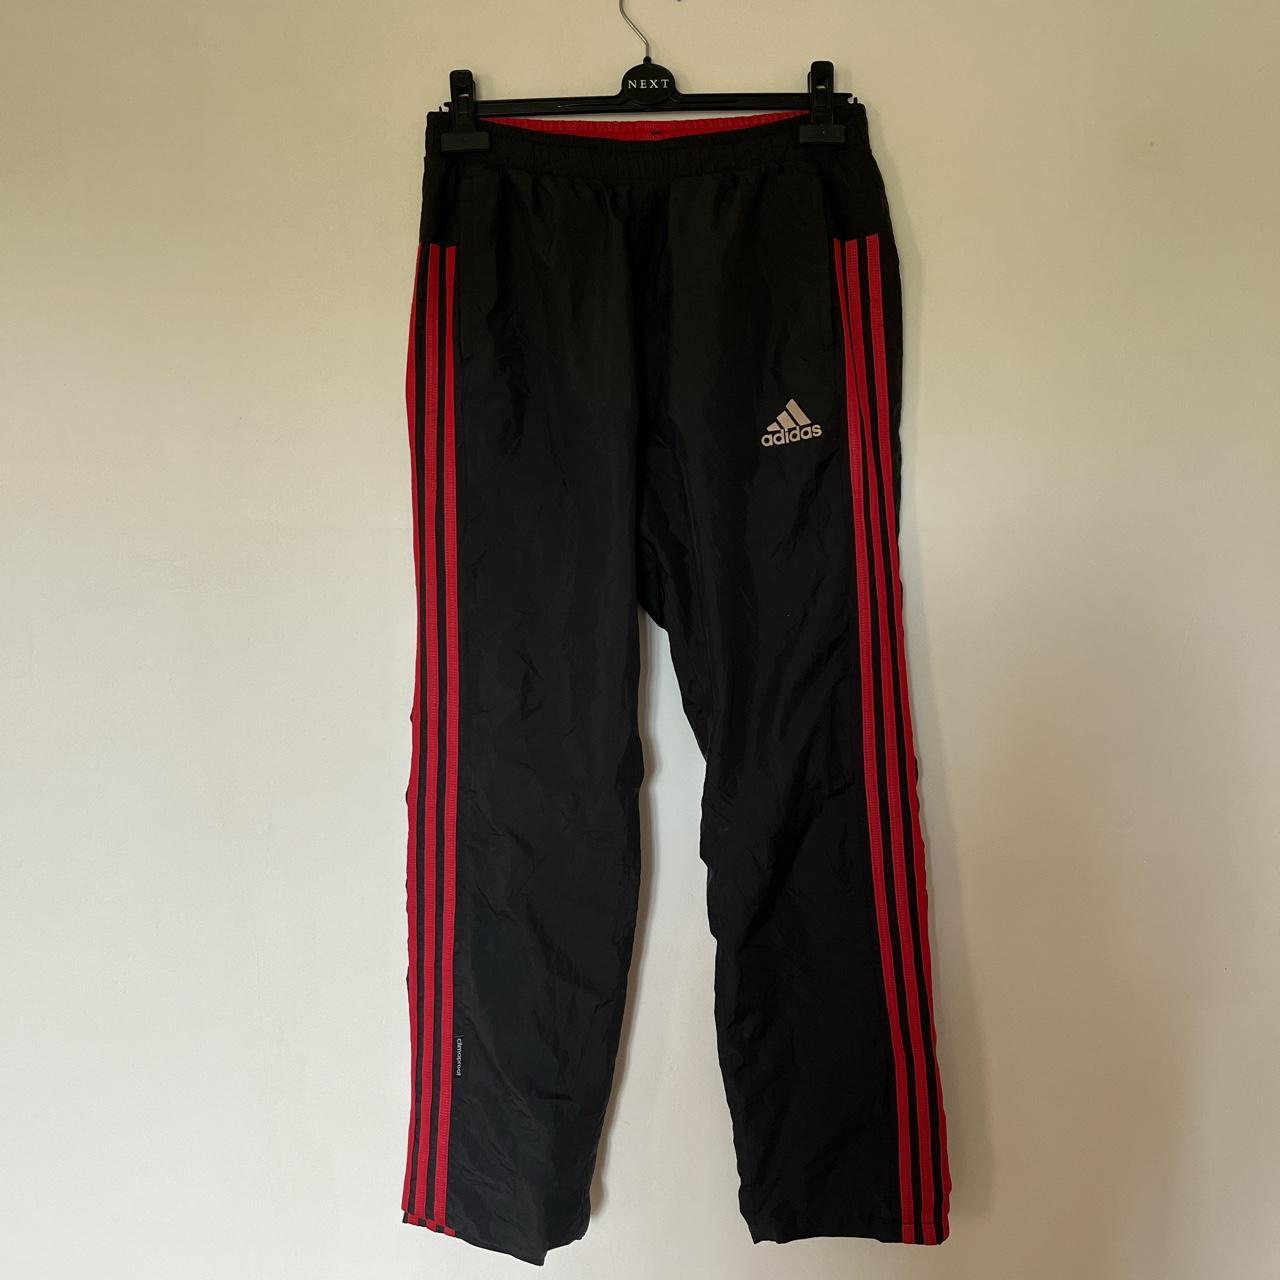 Black and Red Adidas Trackies - Good Condition - Size S - Depop